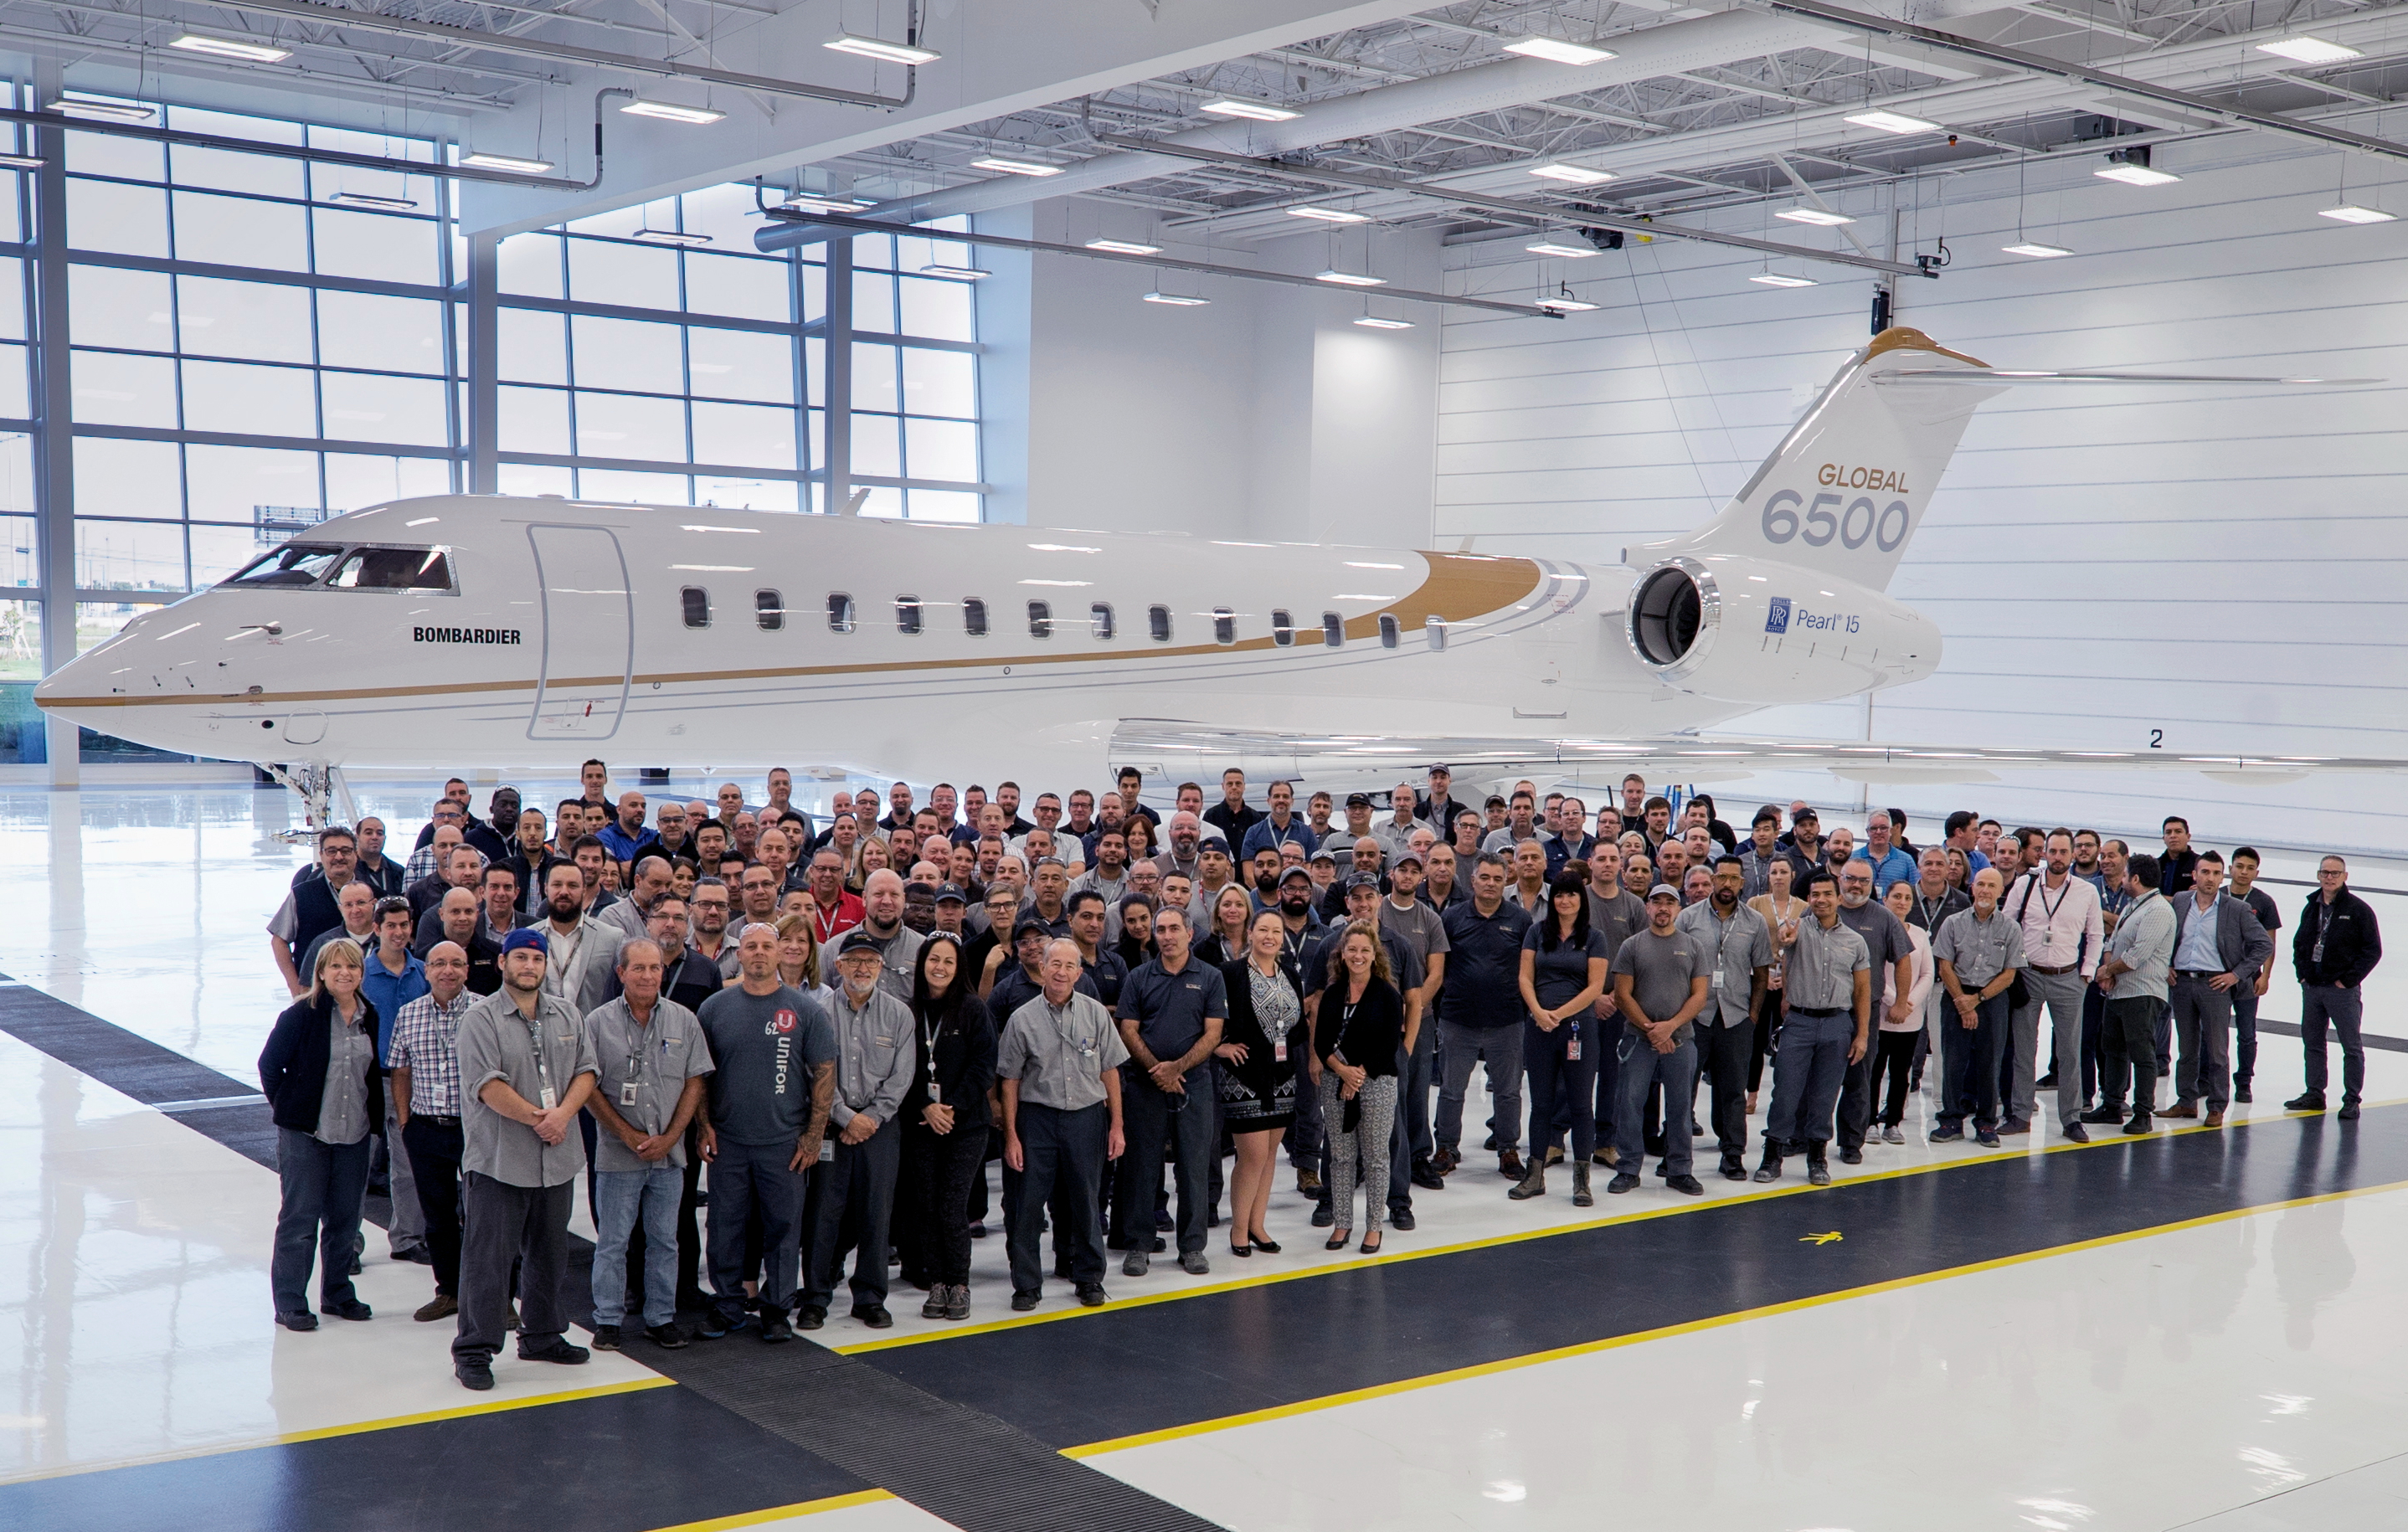 Team Bombardier with a Global 6500 aircraft in the background. Click to enlarge.